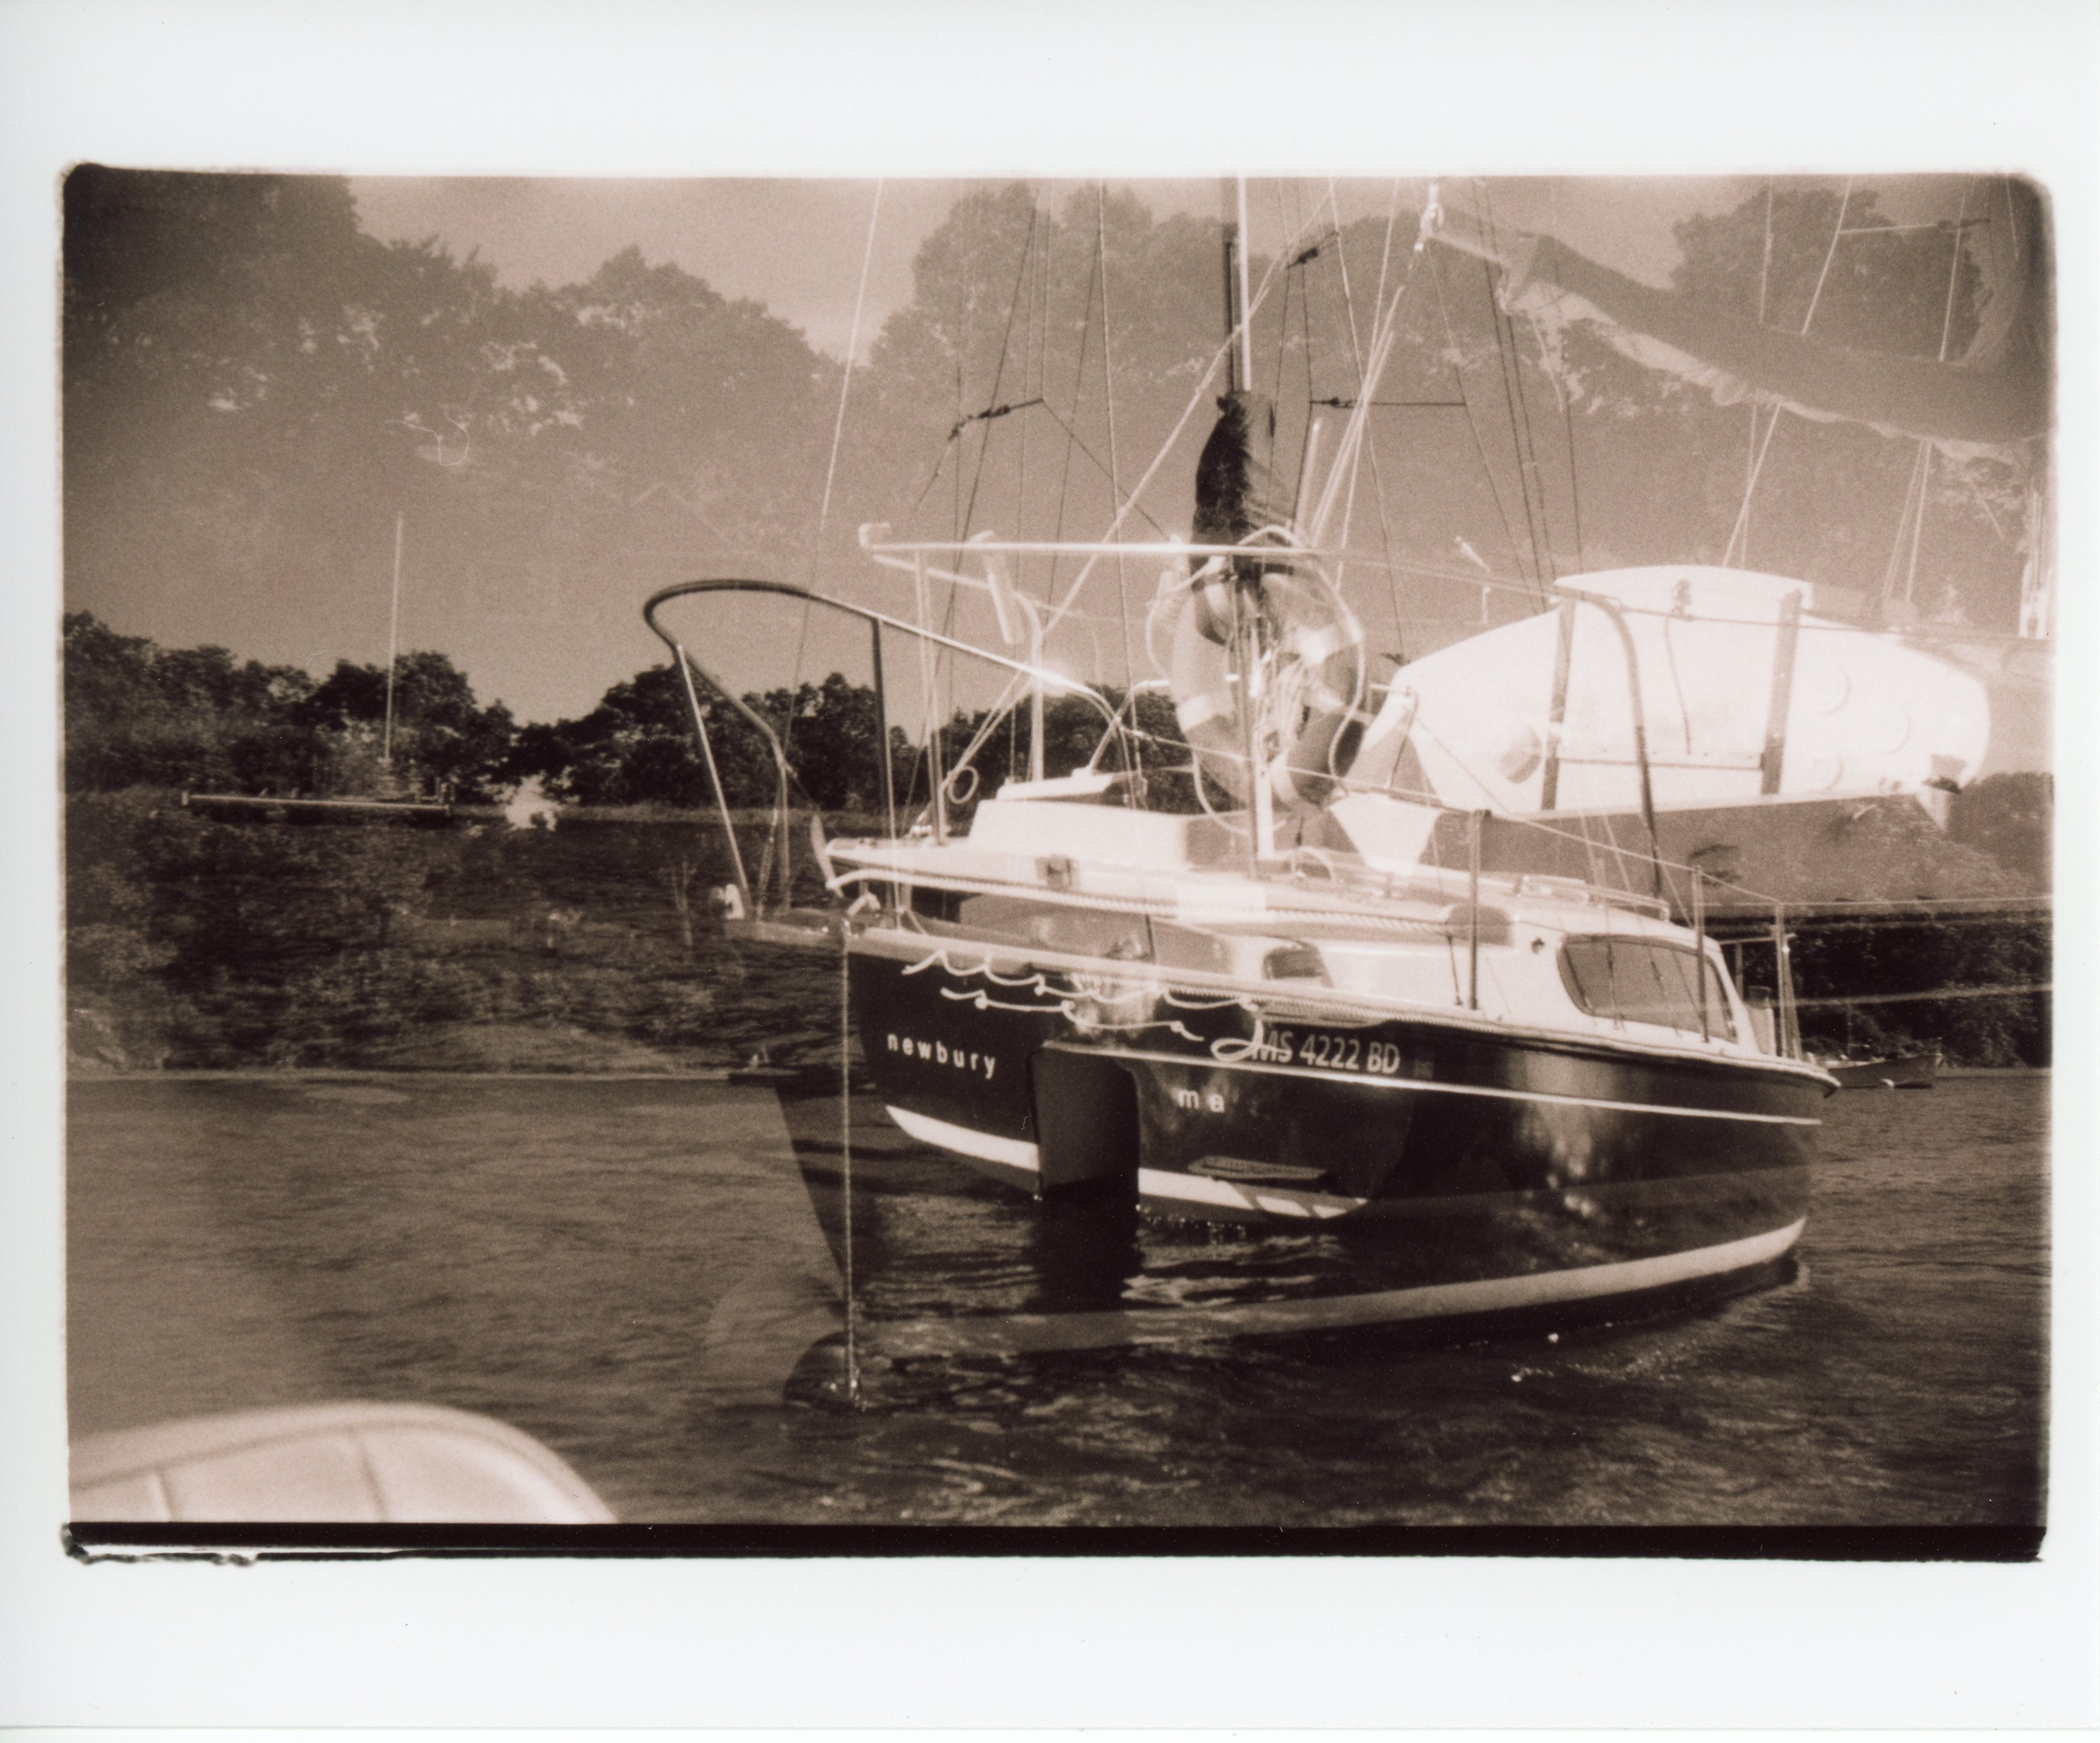 a black and white, sepia toned, 35mm print with messy edges; the image is double exposure of the bow and stern of a boat; on the transom in white cursive letters it says rising sea below in serif lowercase: newbury, ma, MS 4222 BD; there is a strip of land and trees in the background